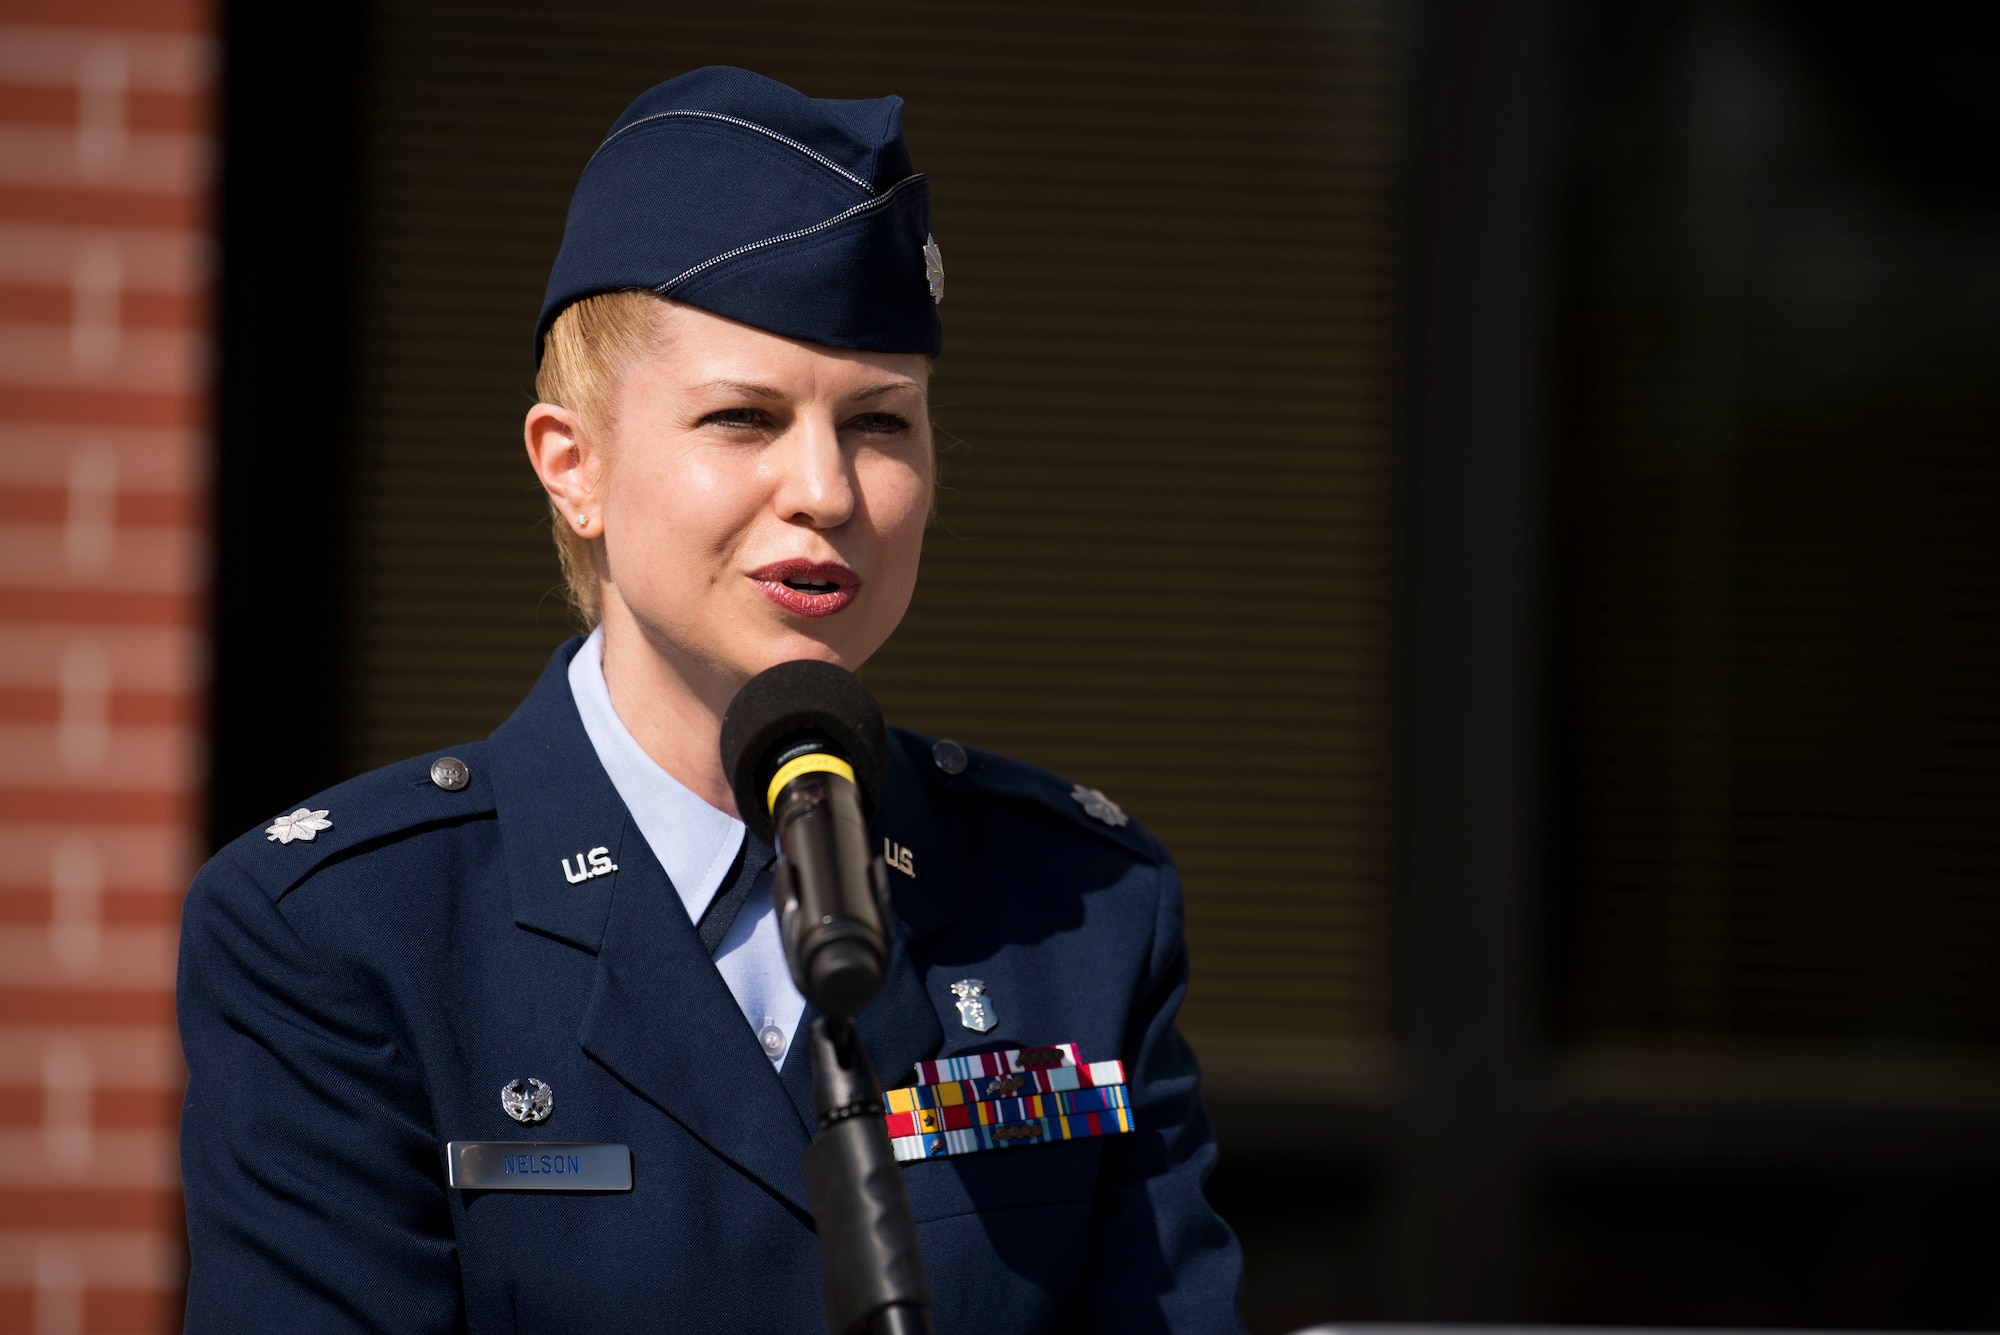 U.S. Air Force Lt. Col. Heather Nelson, 92nd Medical Group commander, gives remarks during the 92nd MDG re-designation ceremony at Fairchild Air Force Base, Washington, July 19, 2019. The re-designation is a two-phase program with the purpose to increase mission readiness and ensure high quality health care by designating two squadrons to care for service members and beneficiaries separately. (U.S. Air Force photo by Airman 1st Class Lawrence Sena)